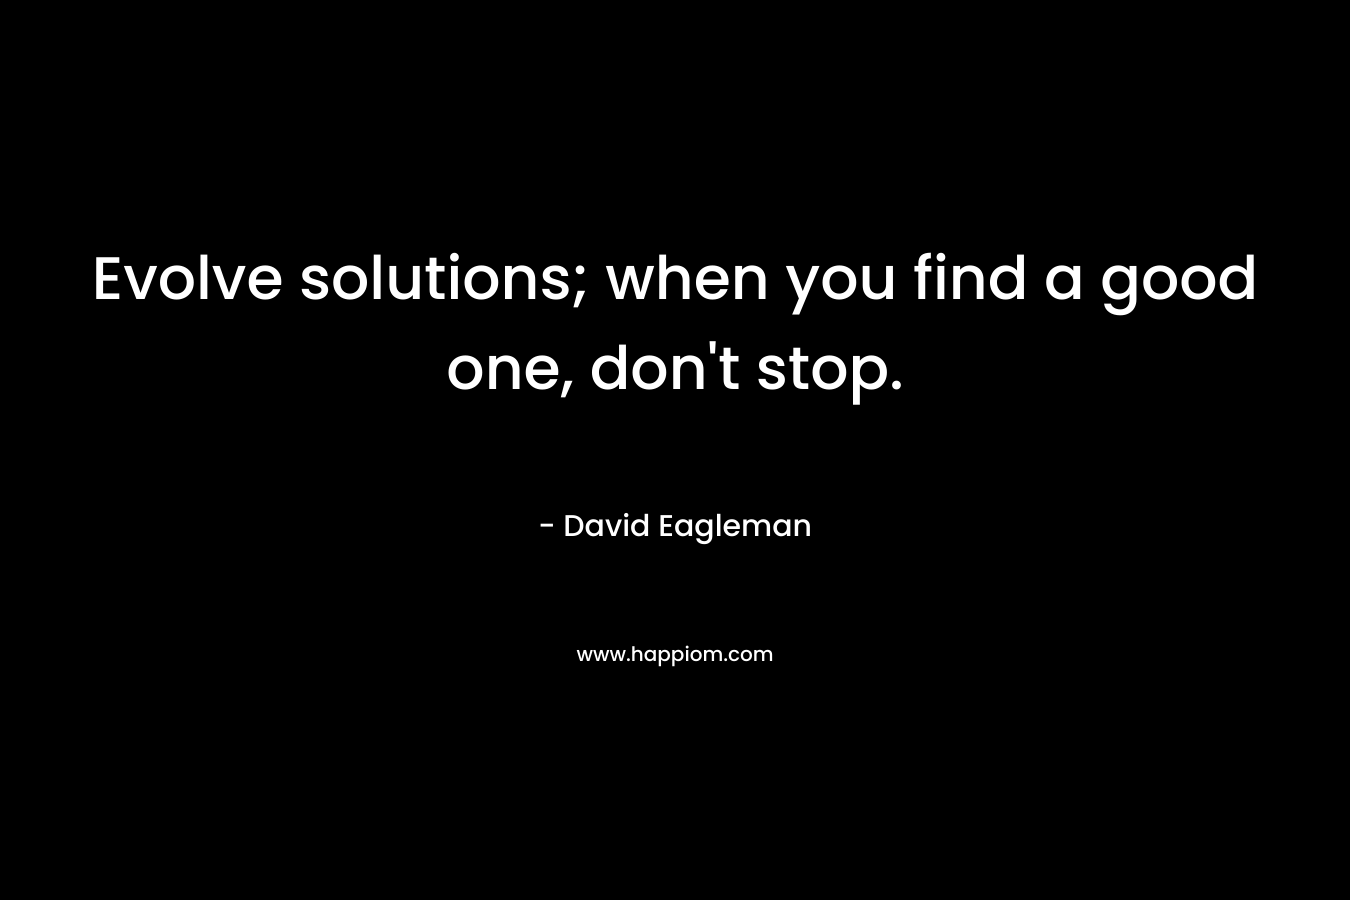 Evolve solutions; when you find a good one, don't stop.